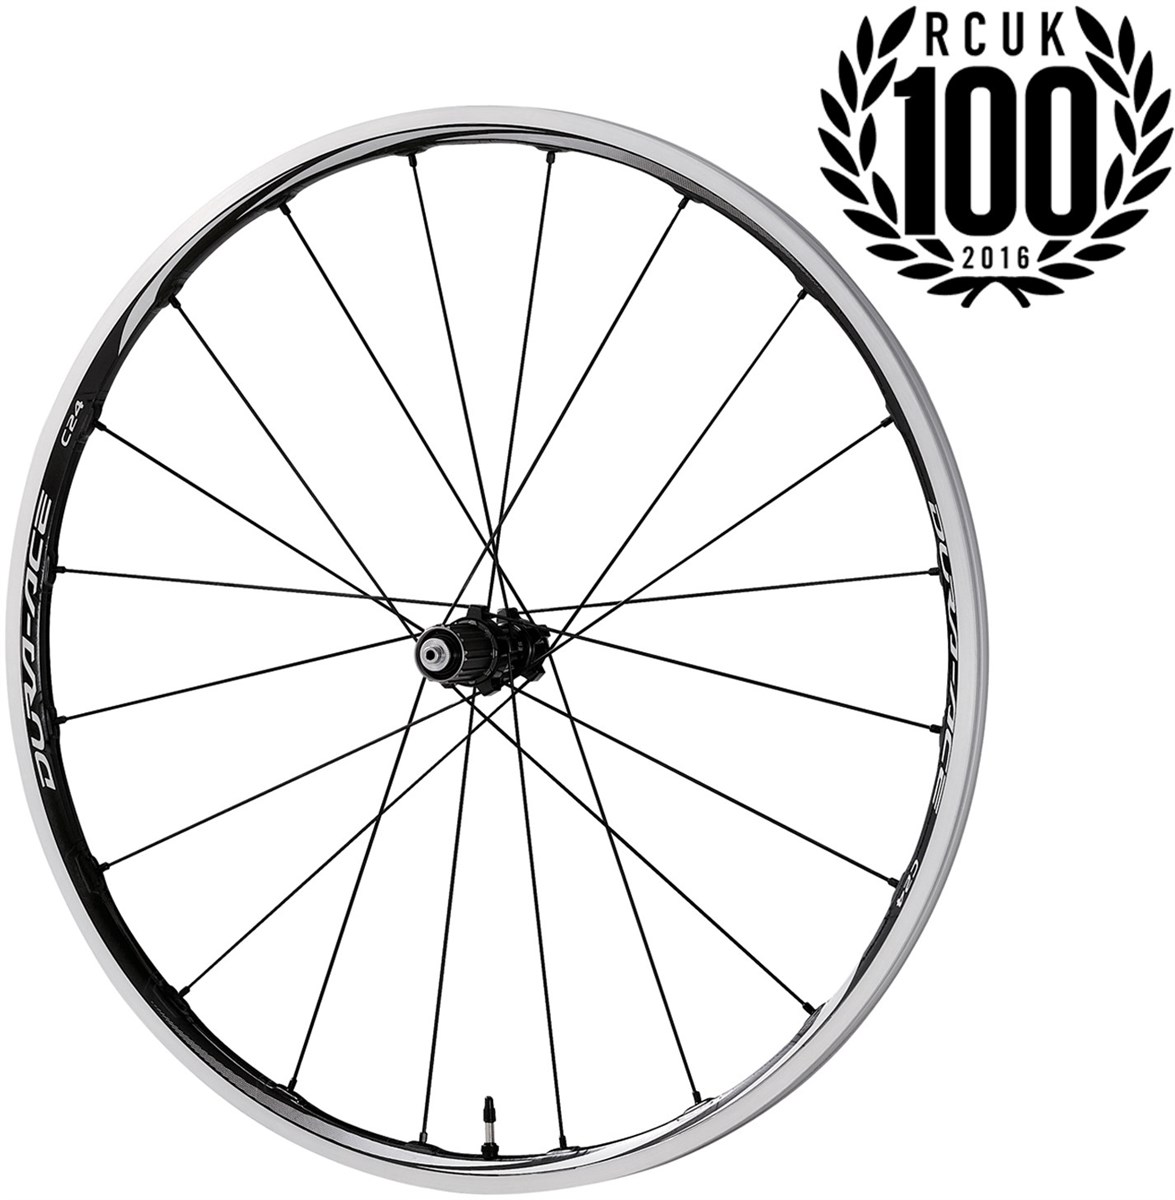 Shimano WH-9000 Dura-Ace C24-TL Tubeless Compatible Clincher 24mm 11-Speed Rear Road Wheel product image